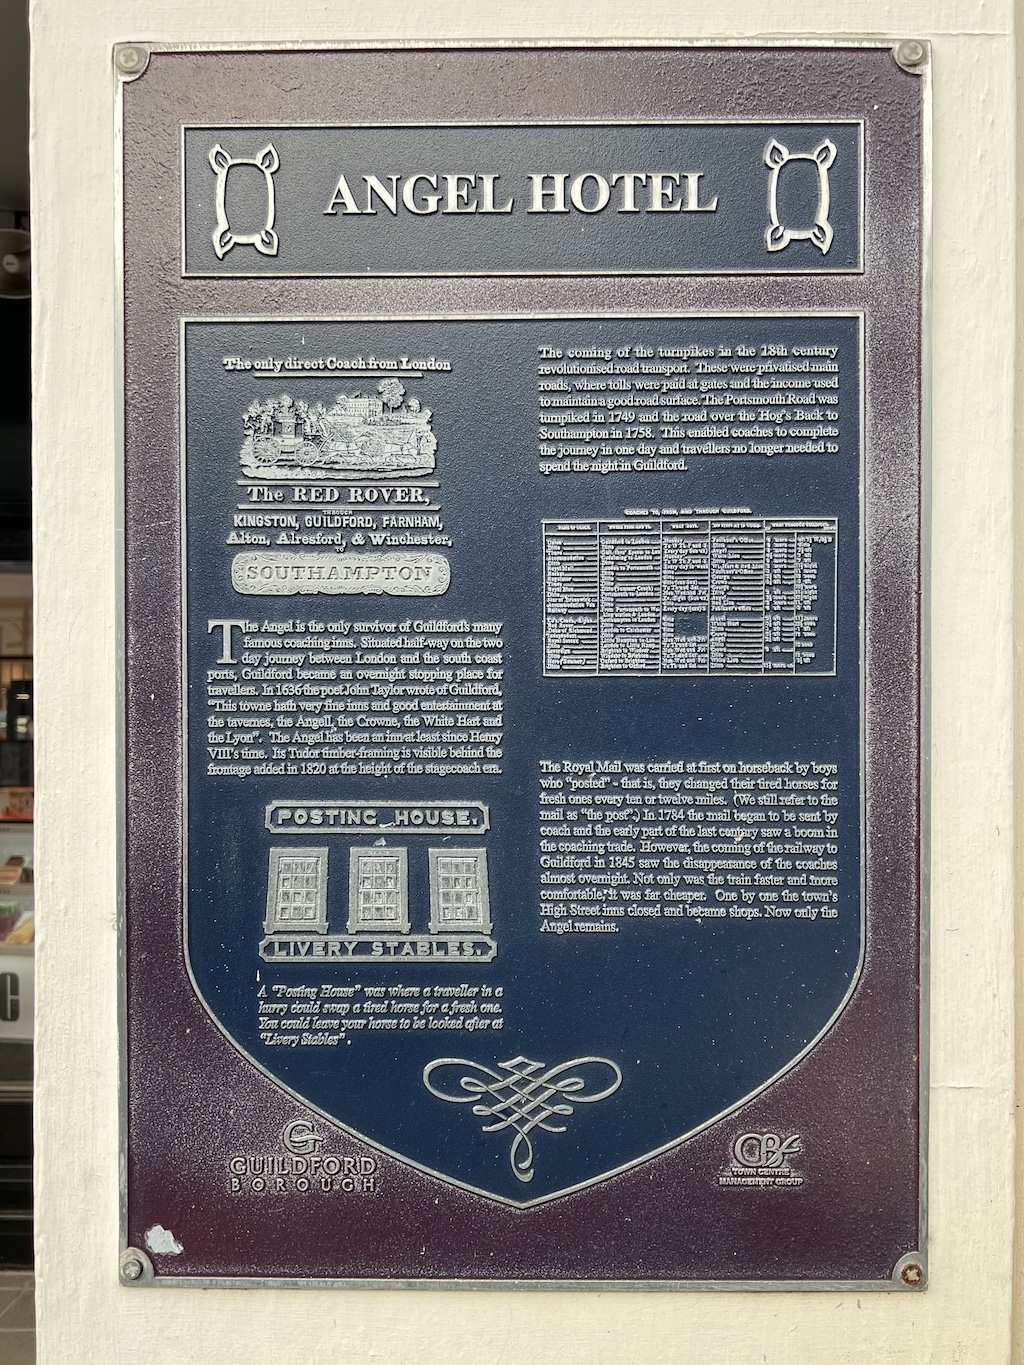 Blue plaque in Guildford for the Angel Hotel